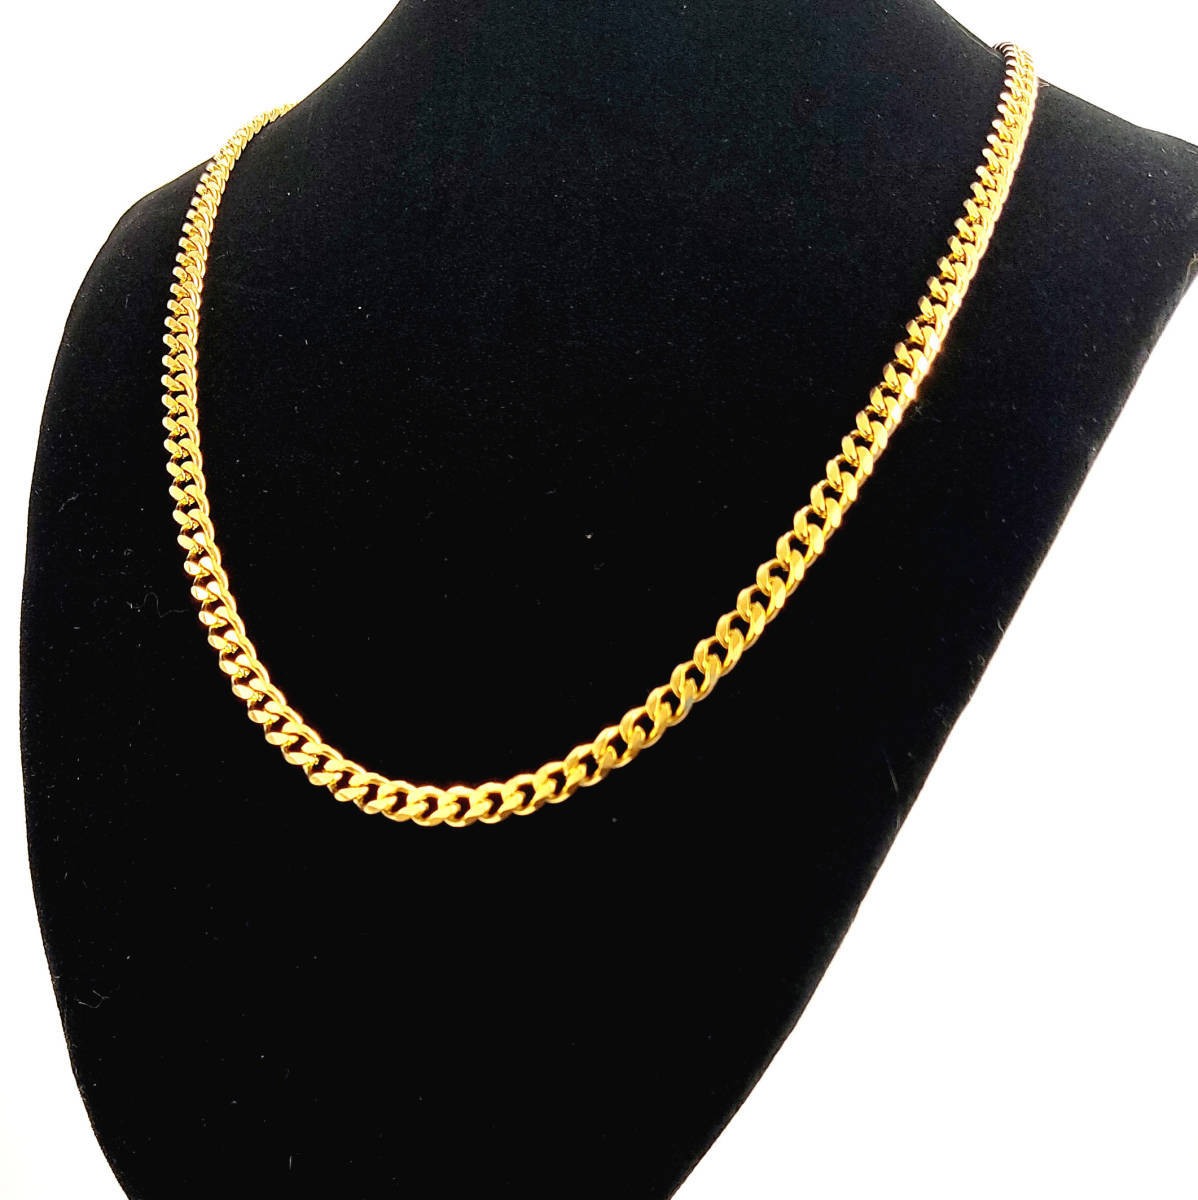  flat necklace 18kgp single two surface 5mm 50cm 18k Gold Plated lady's men's necklace Gold Gold Necklace 301